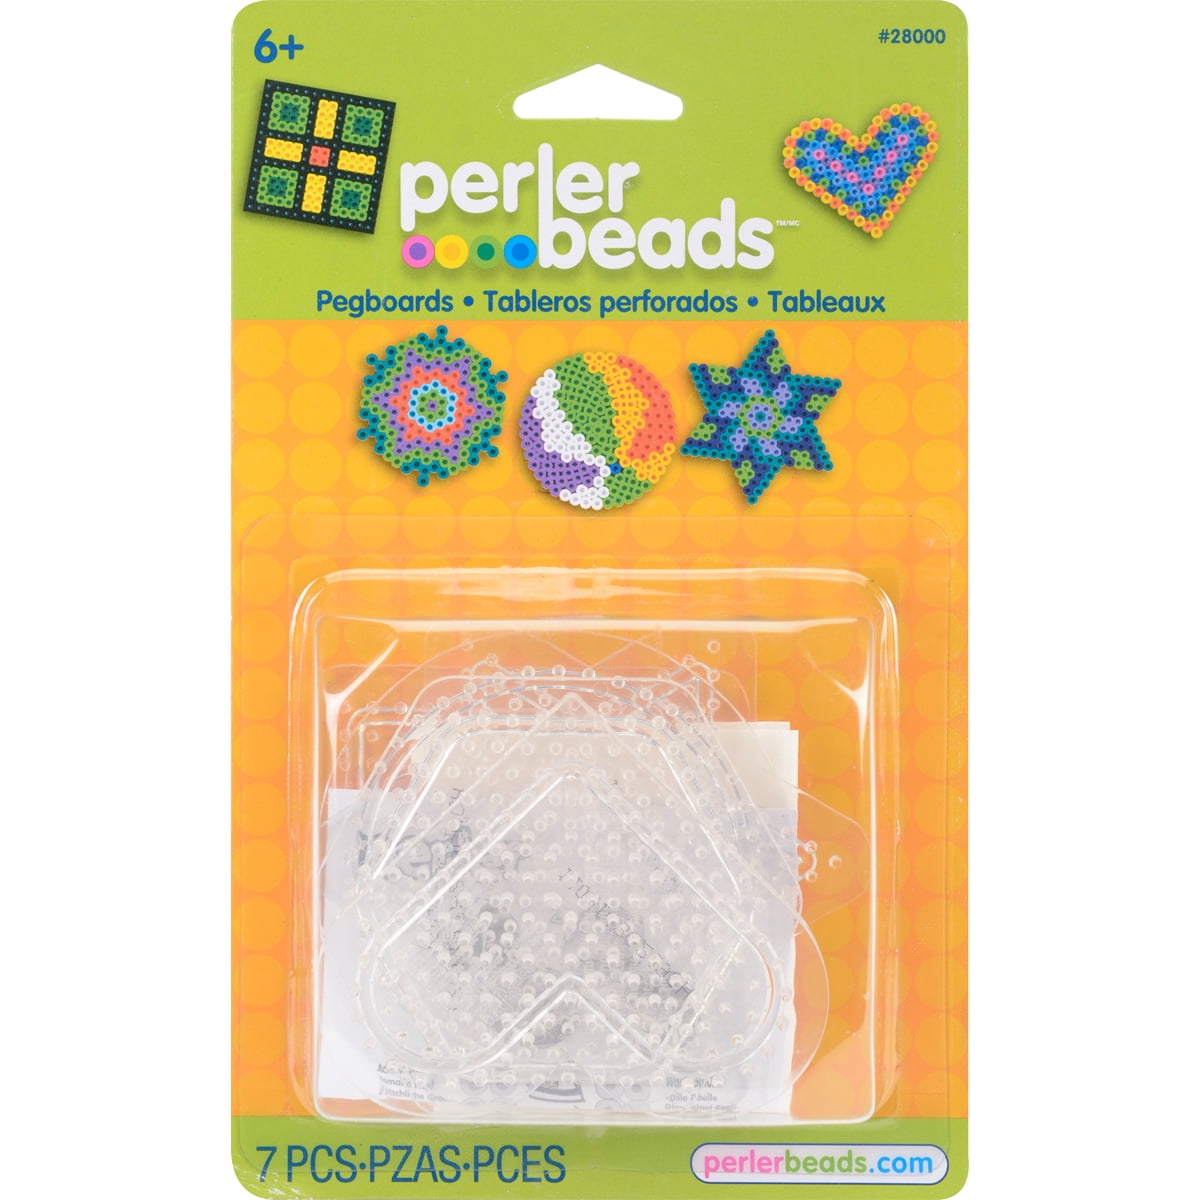  10,500pcs Fuse Beads Craft Kit - Perler Beads Compatible Kit,  34 Colors, 6 Pegboards, 34+ Patterns, Tweezers, Plus Tools, Keychains,  Accessories & More with Free Carrying Case by CraftyCreations : Tools &  Home Improvement